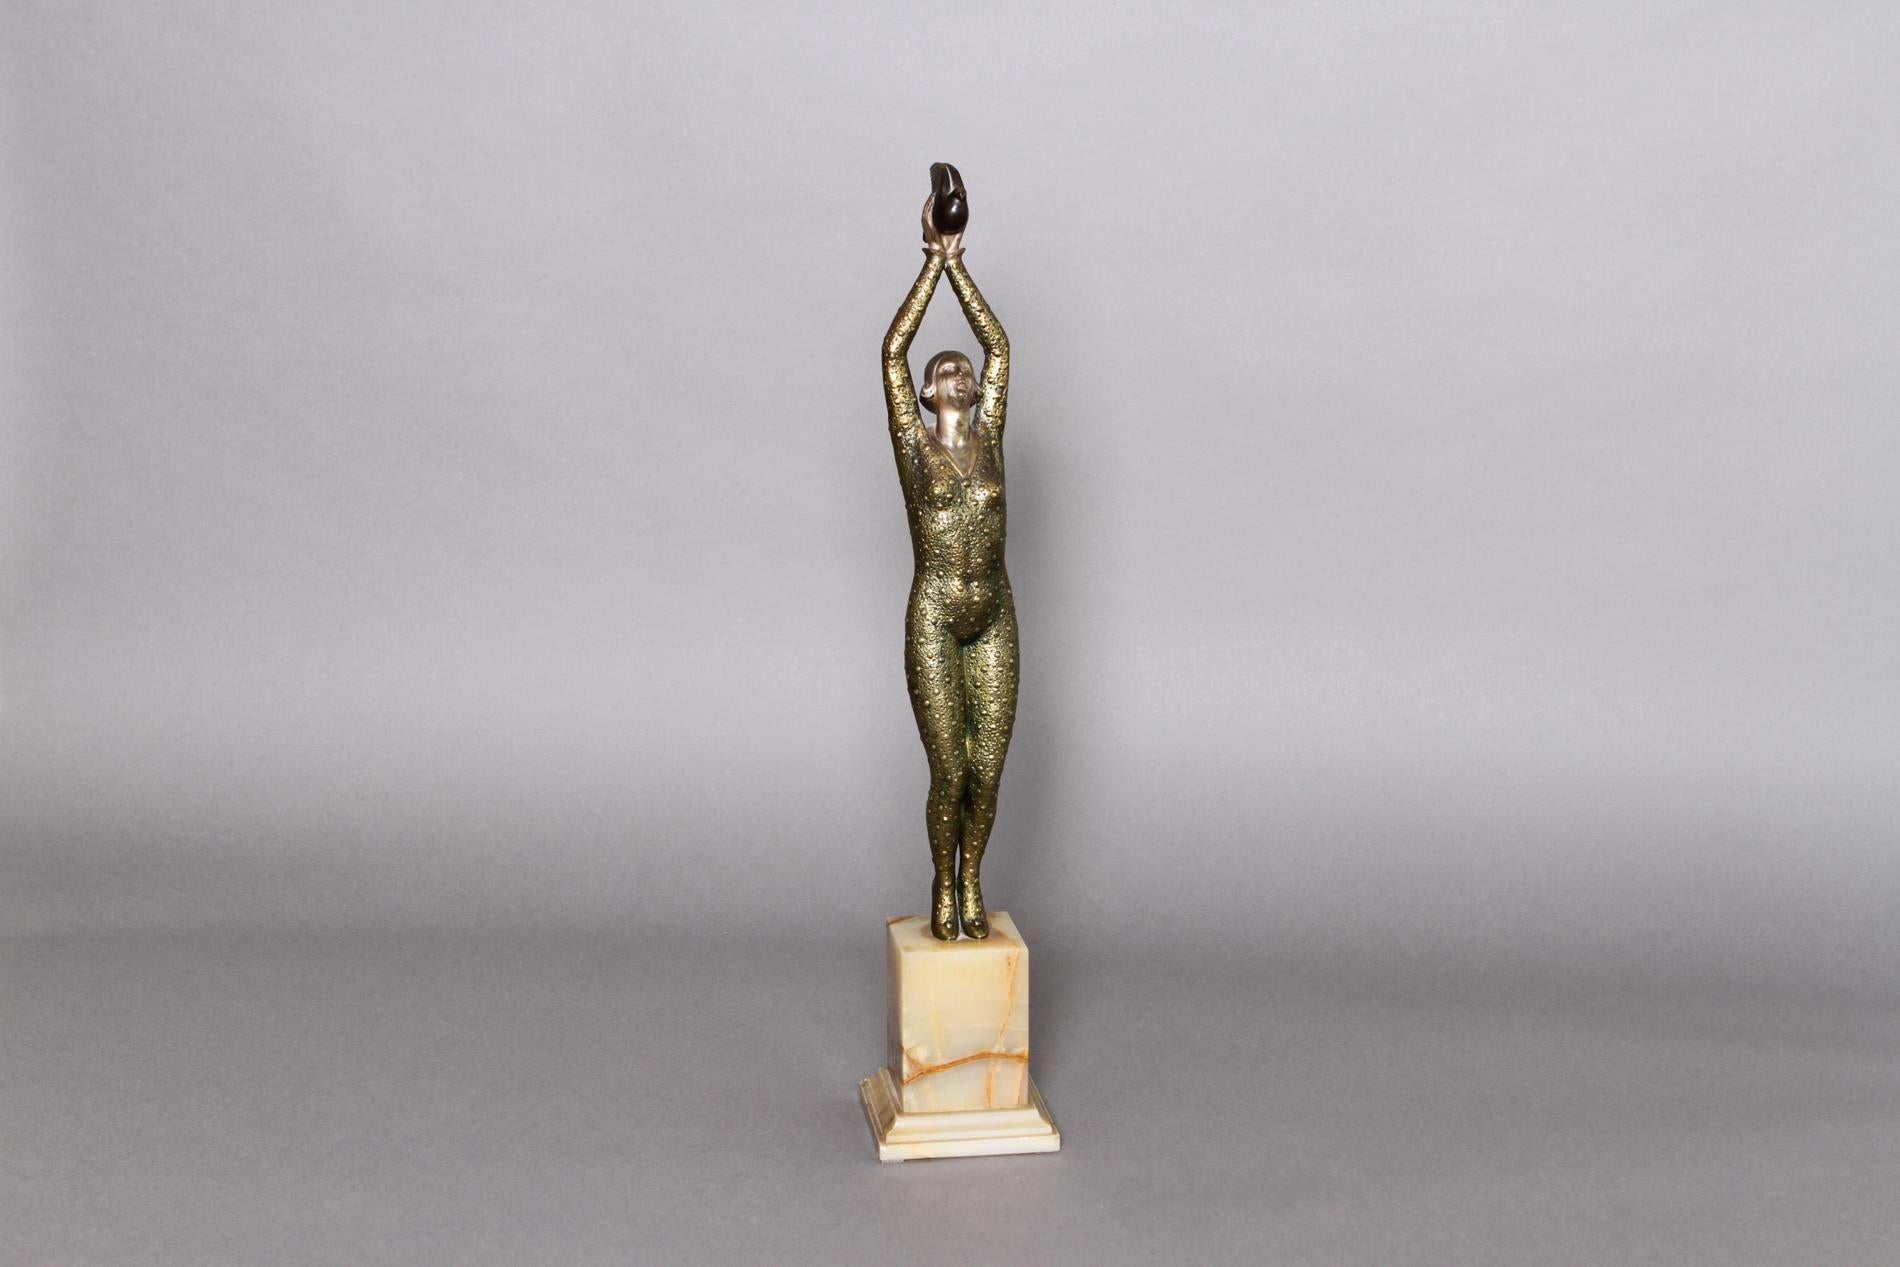 French Art Sculpture by Raoul Lamourdedieu, french sculptor from the Art deco period. The sculpture is in all patinated bronze and has an onyx base. It represents a woman with a dove. 